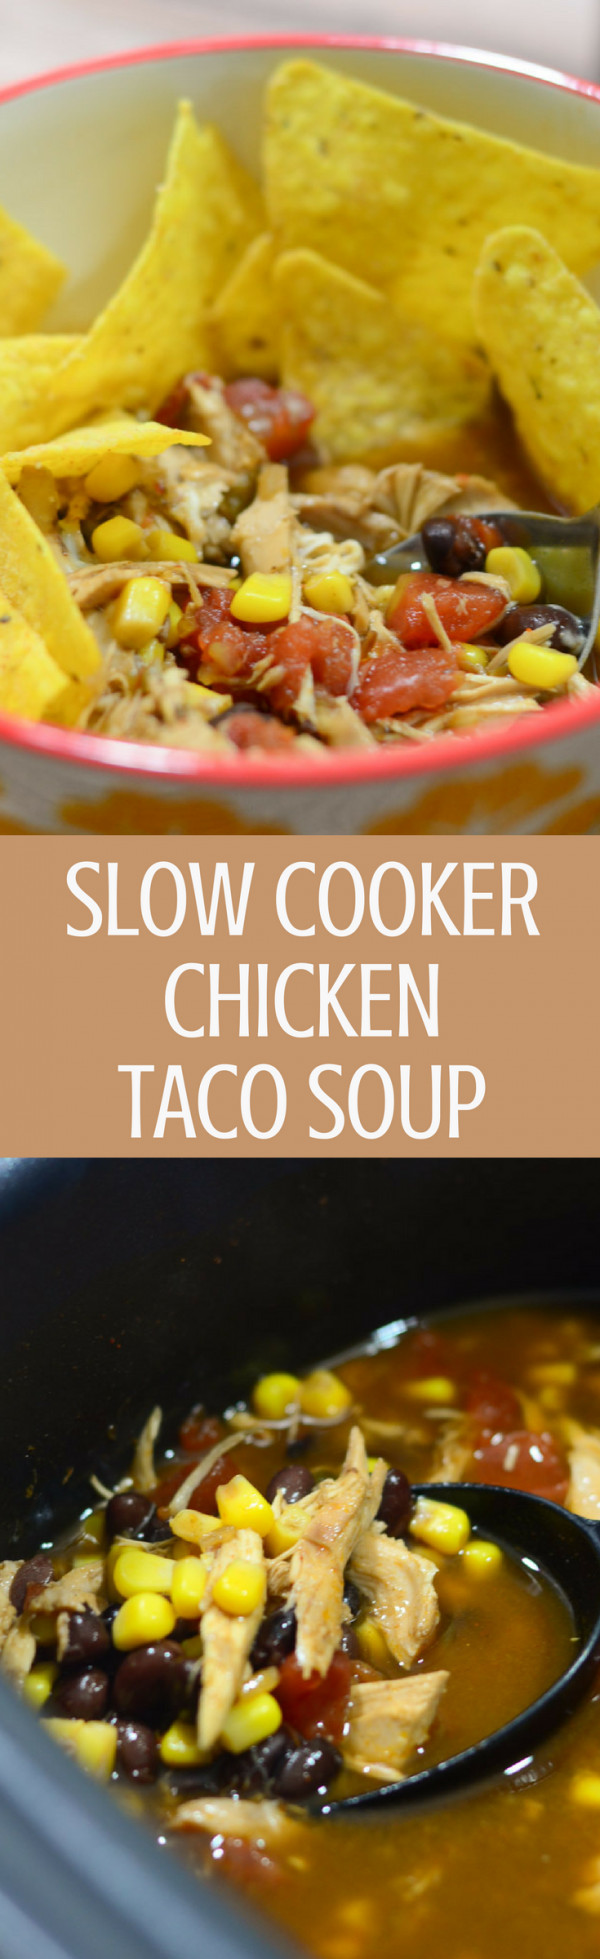 Chicken Taco Soup Slow Cooker
 Slow Cooker Chicken Taco Soup Mommy Hates Cooking